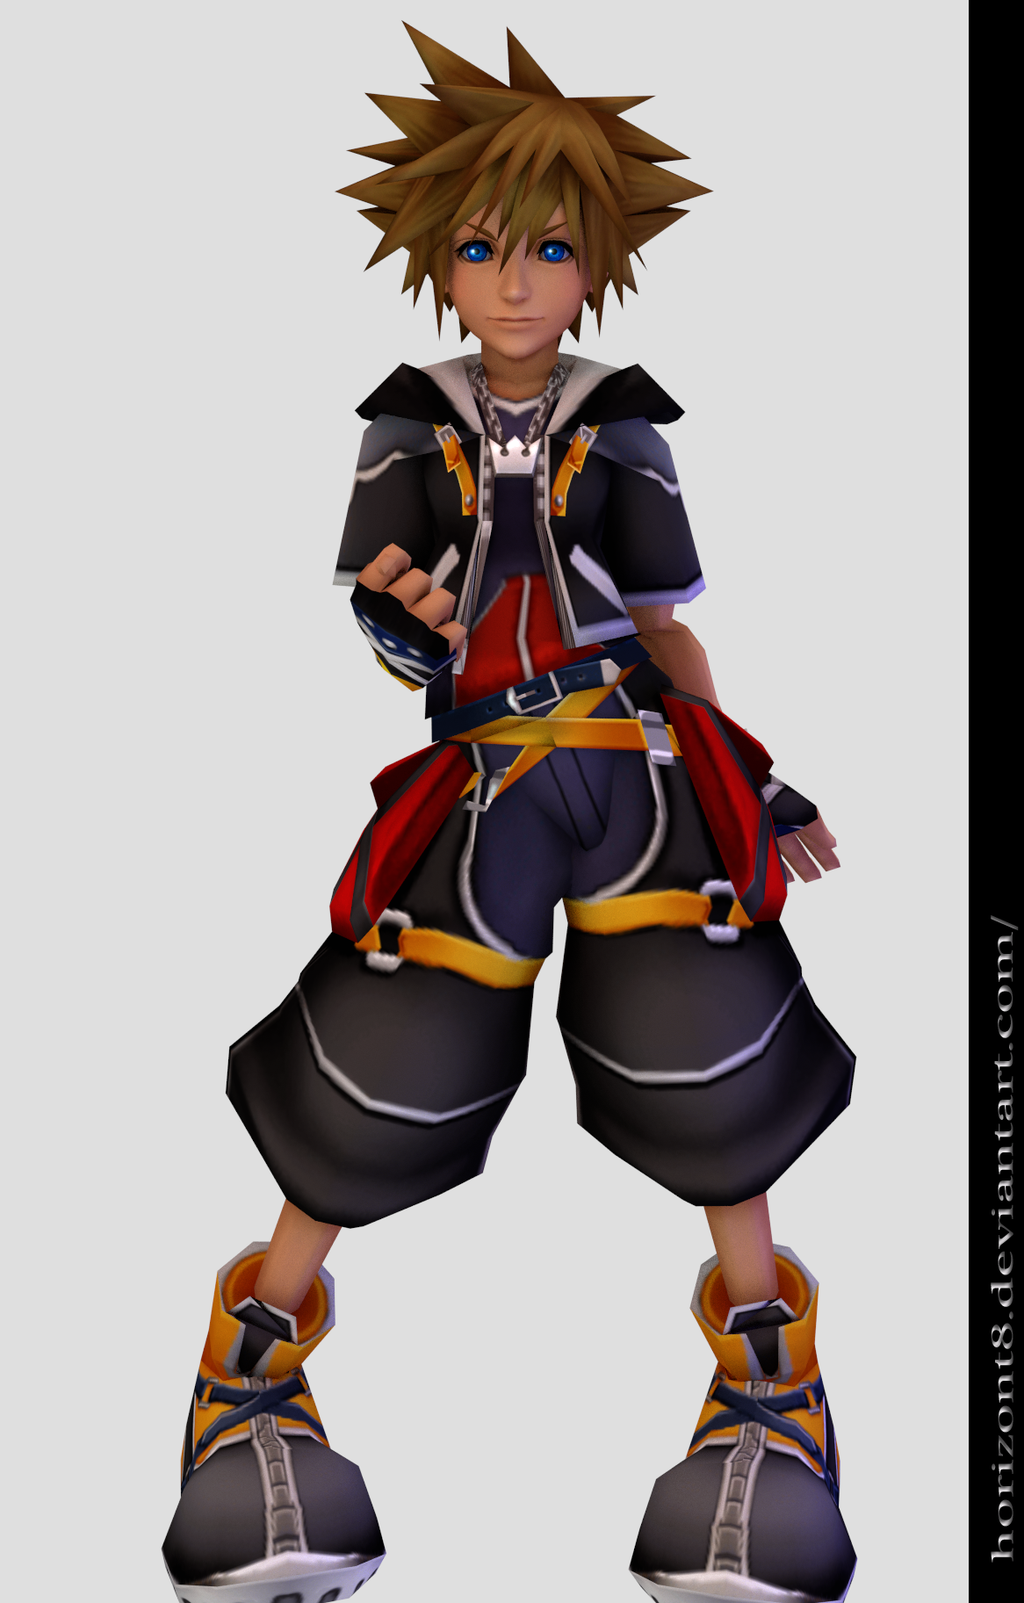 Sora From Kingdom Hearts Submited Image